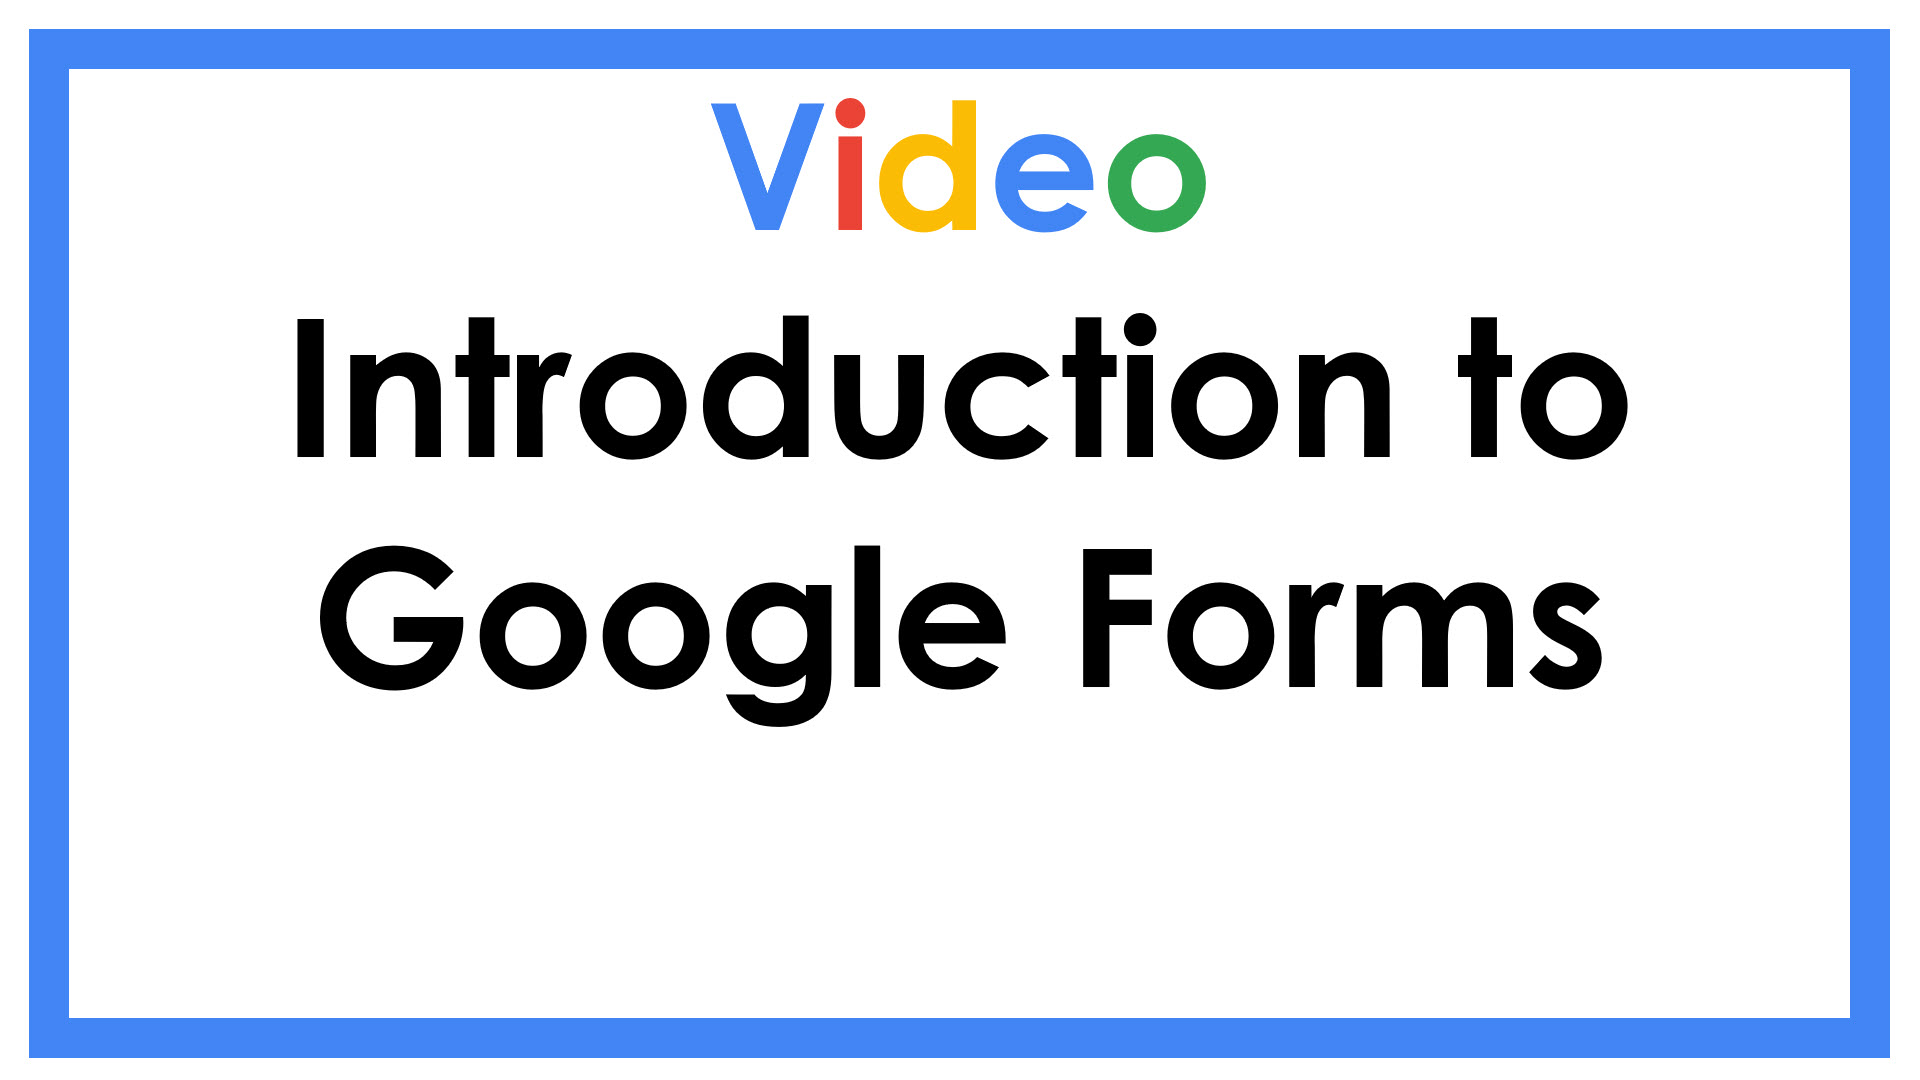 Introduction to Google Forms